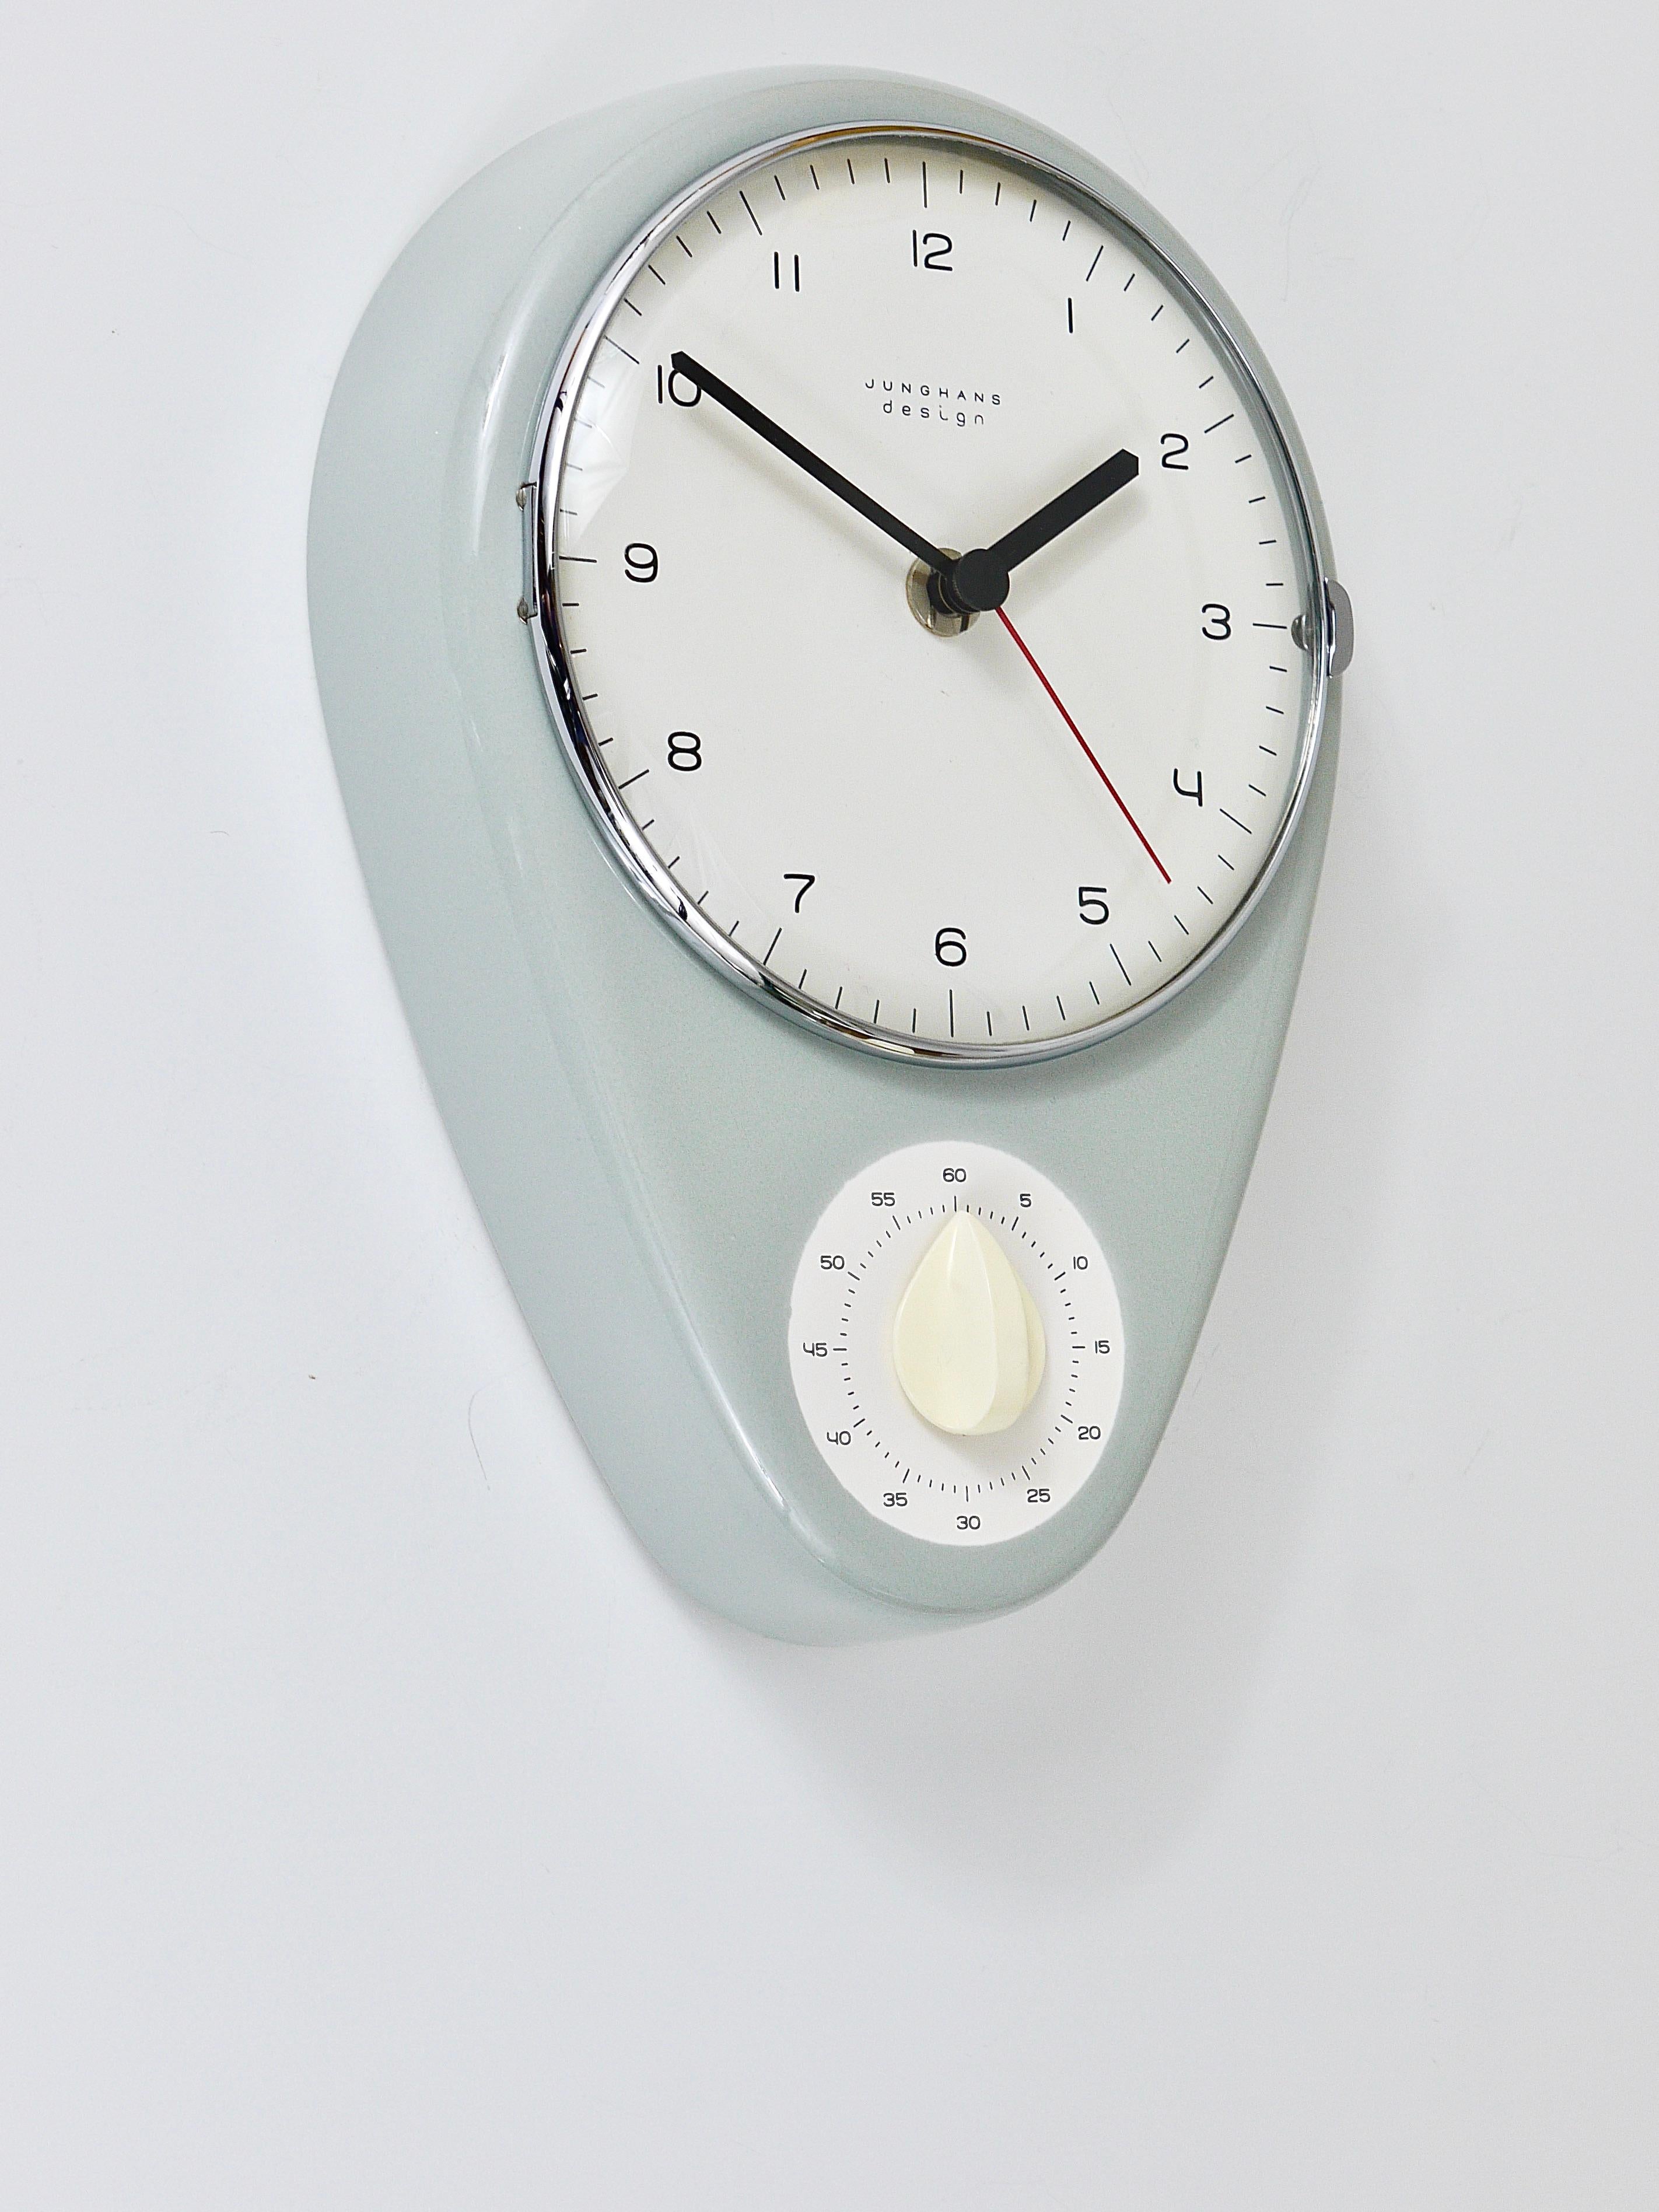 An iconic modernist design wall clock and timer, original and old from the 1950s, designed by Max Bill, executed by Junghans Germany. A beautiful and adorable wall clock with a light grey glazed ceramic housing, which is, as far as we can say, the